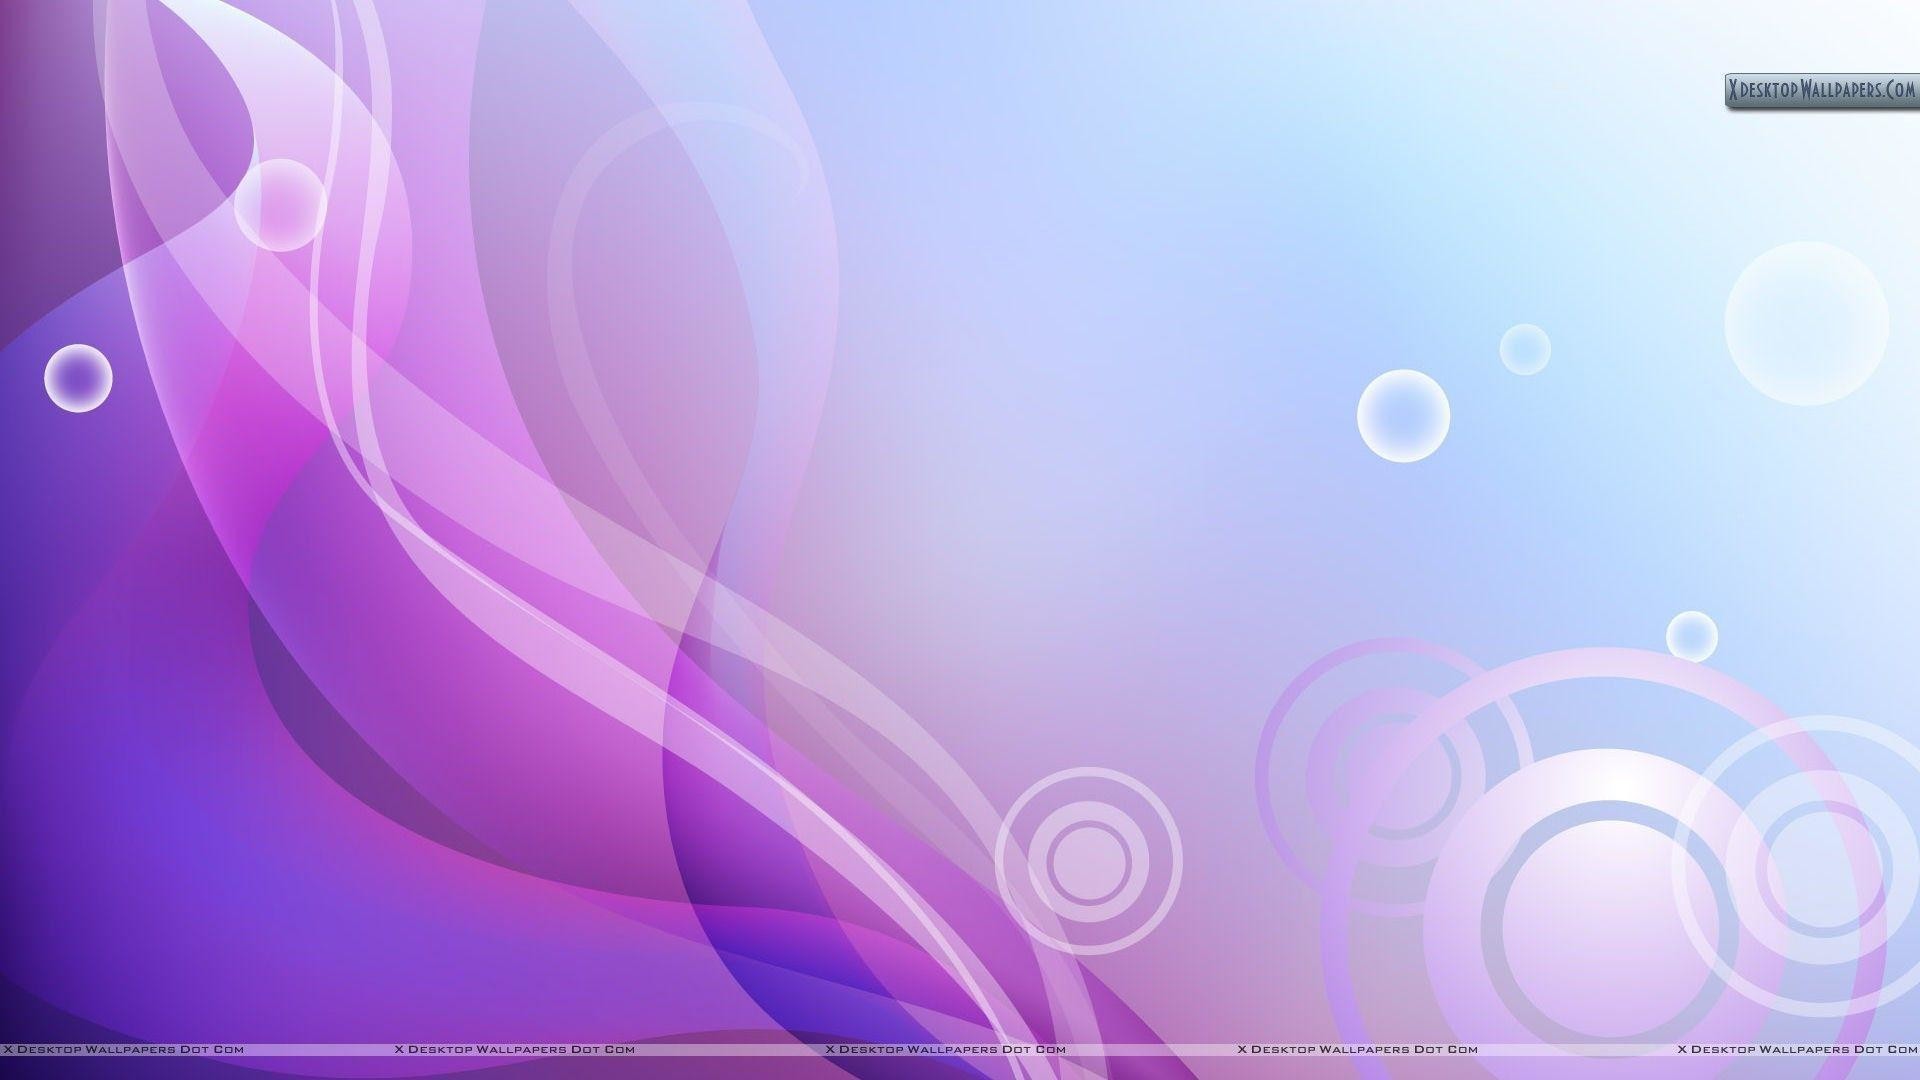 1920x1080 Nice Background 3 359391 High Definition Wallpapers| wallalay.com